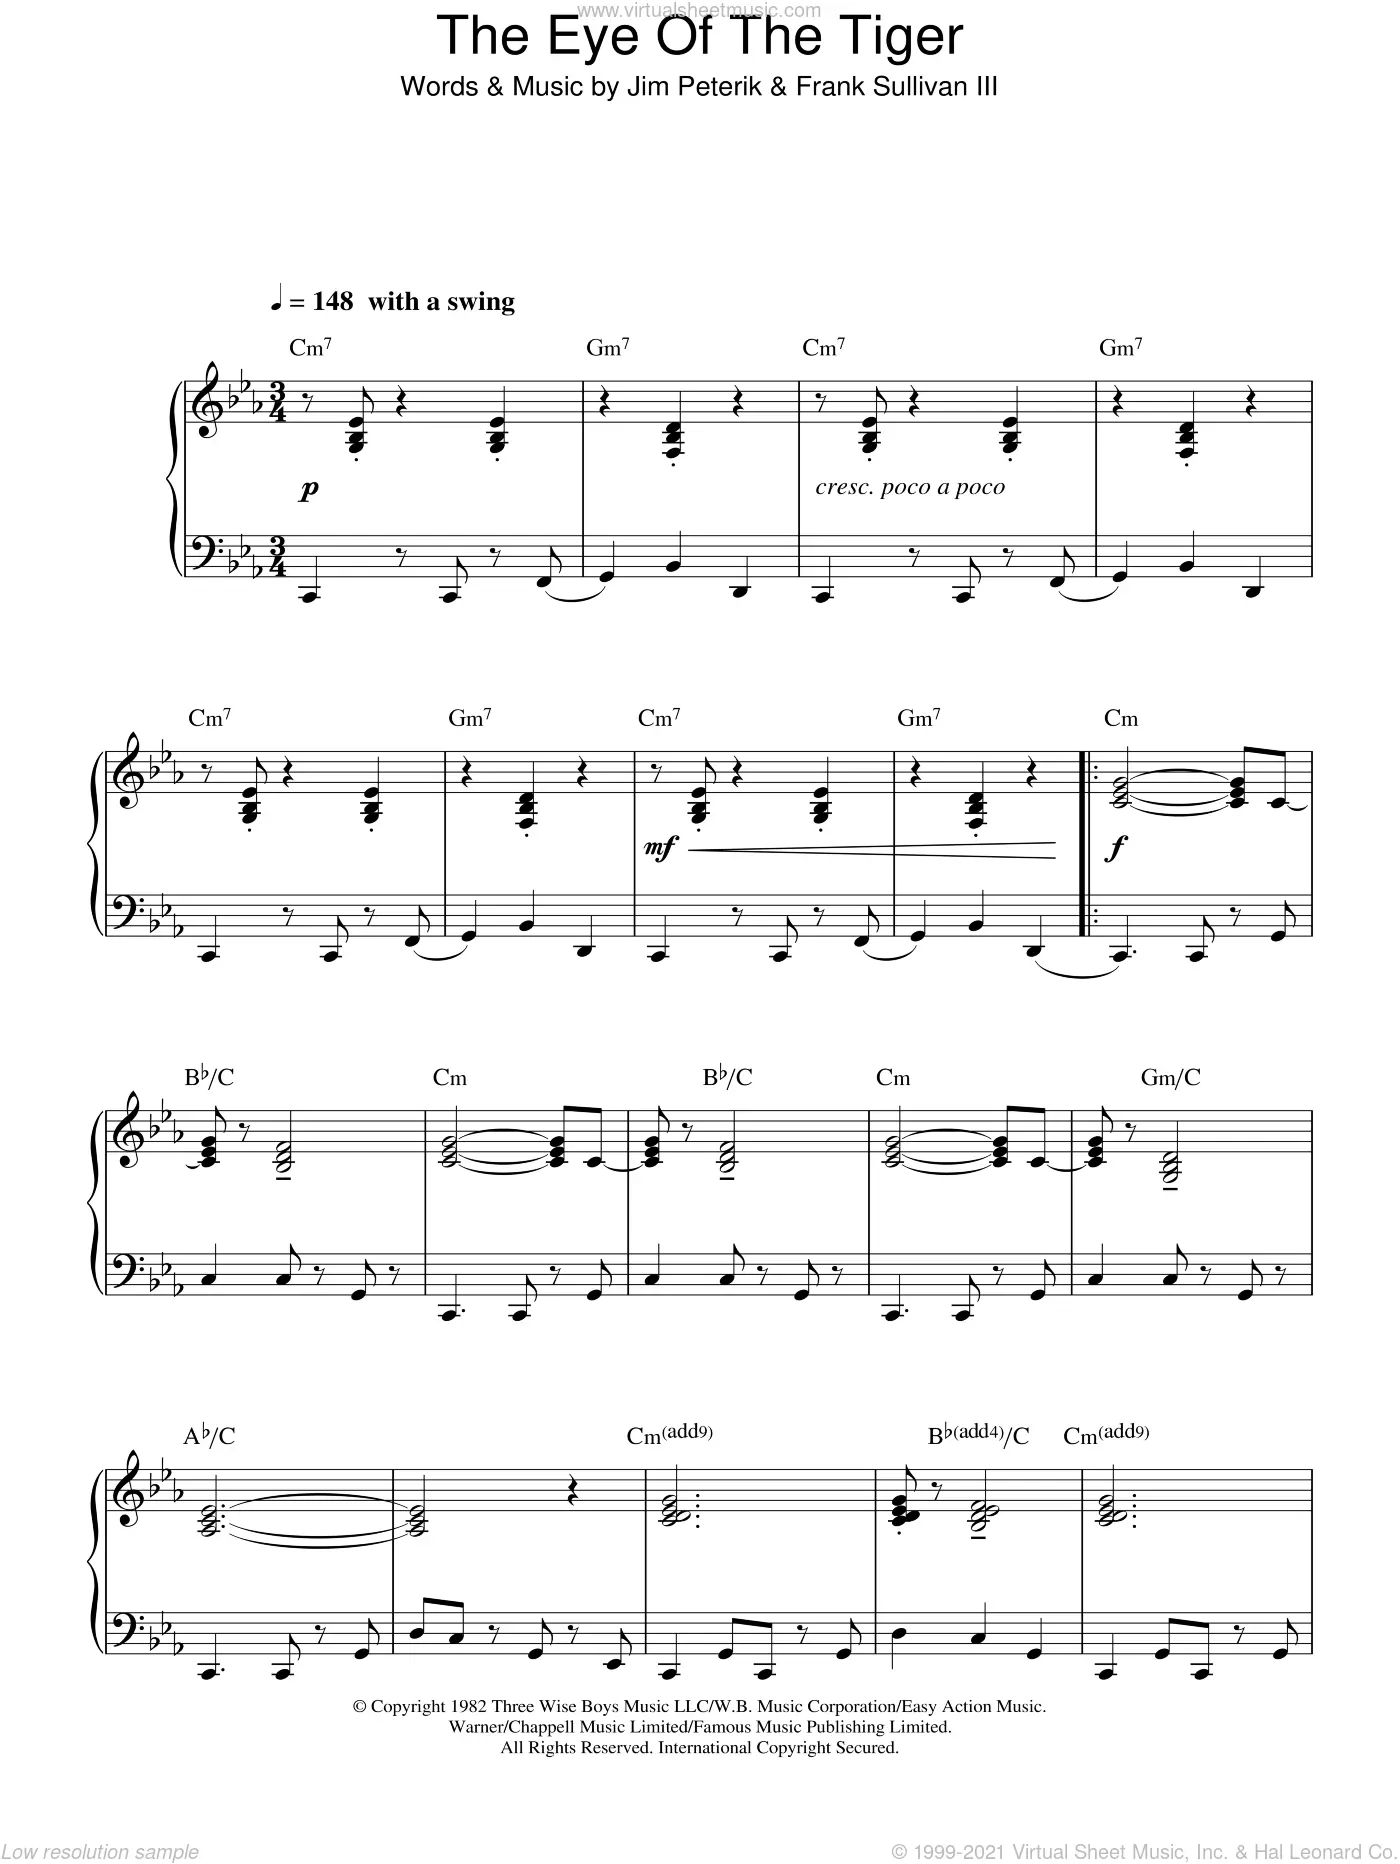 Eye of the Tiger Piano Accompaniment Sheet music for Piano (Solo) Easy